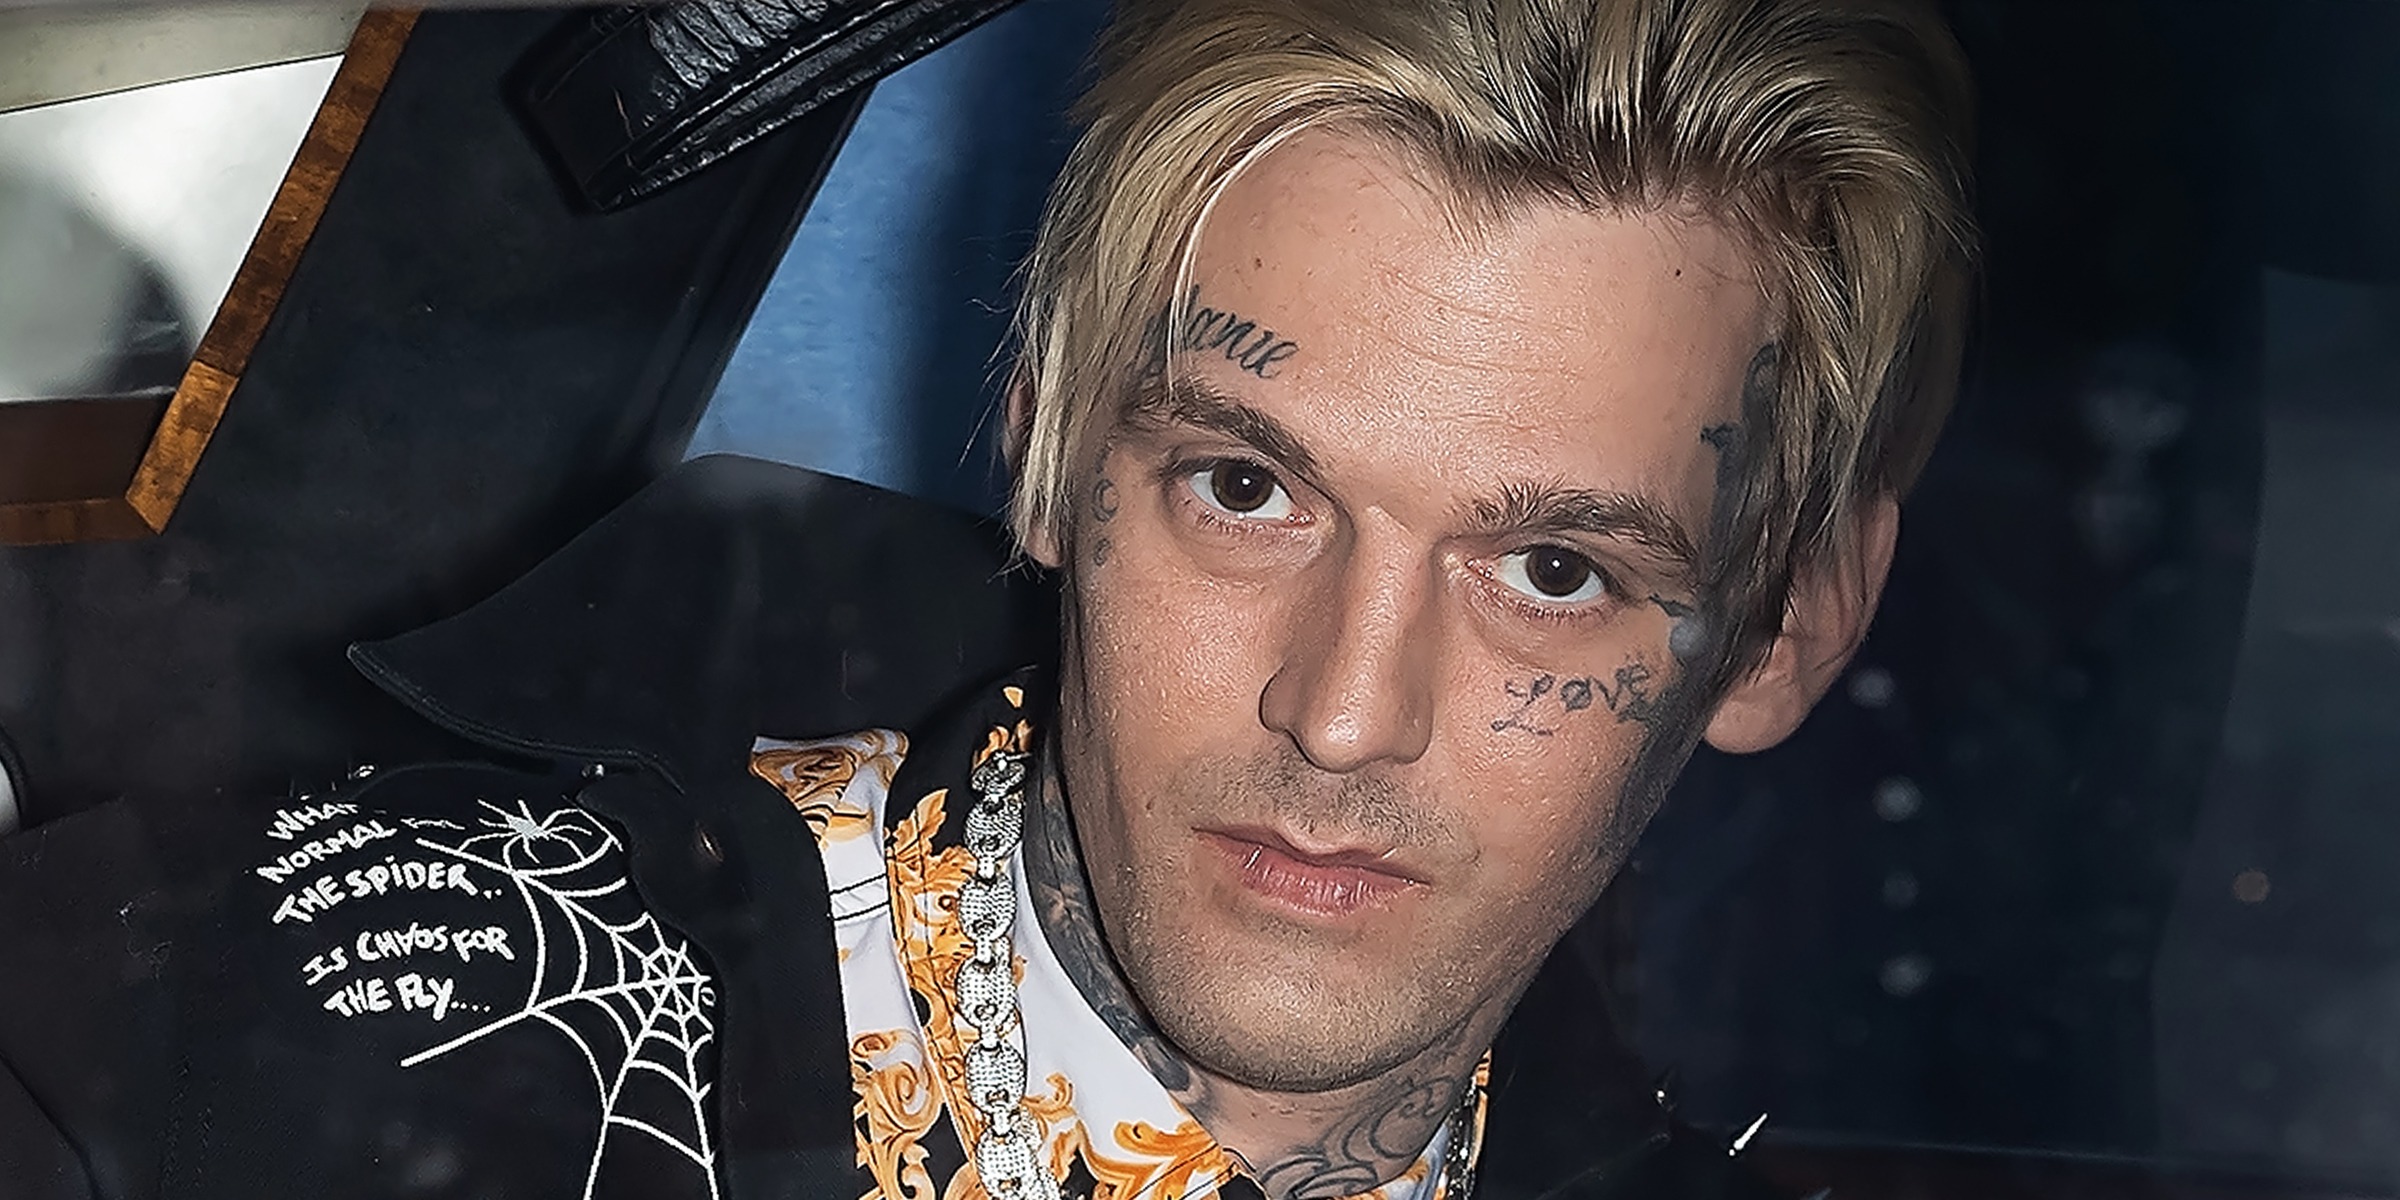 Remembering Aaron Carter A look back at a well-known star from the 2000s (4)